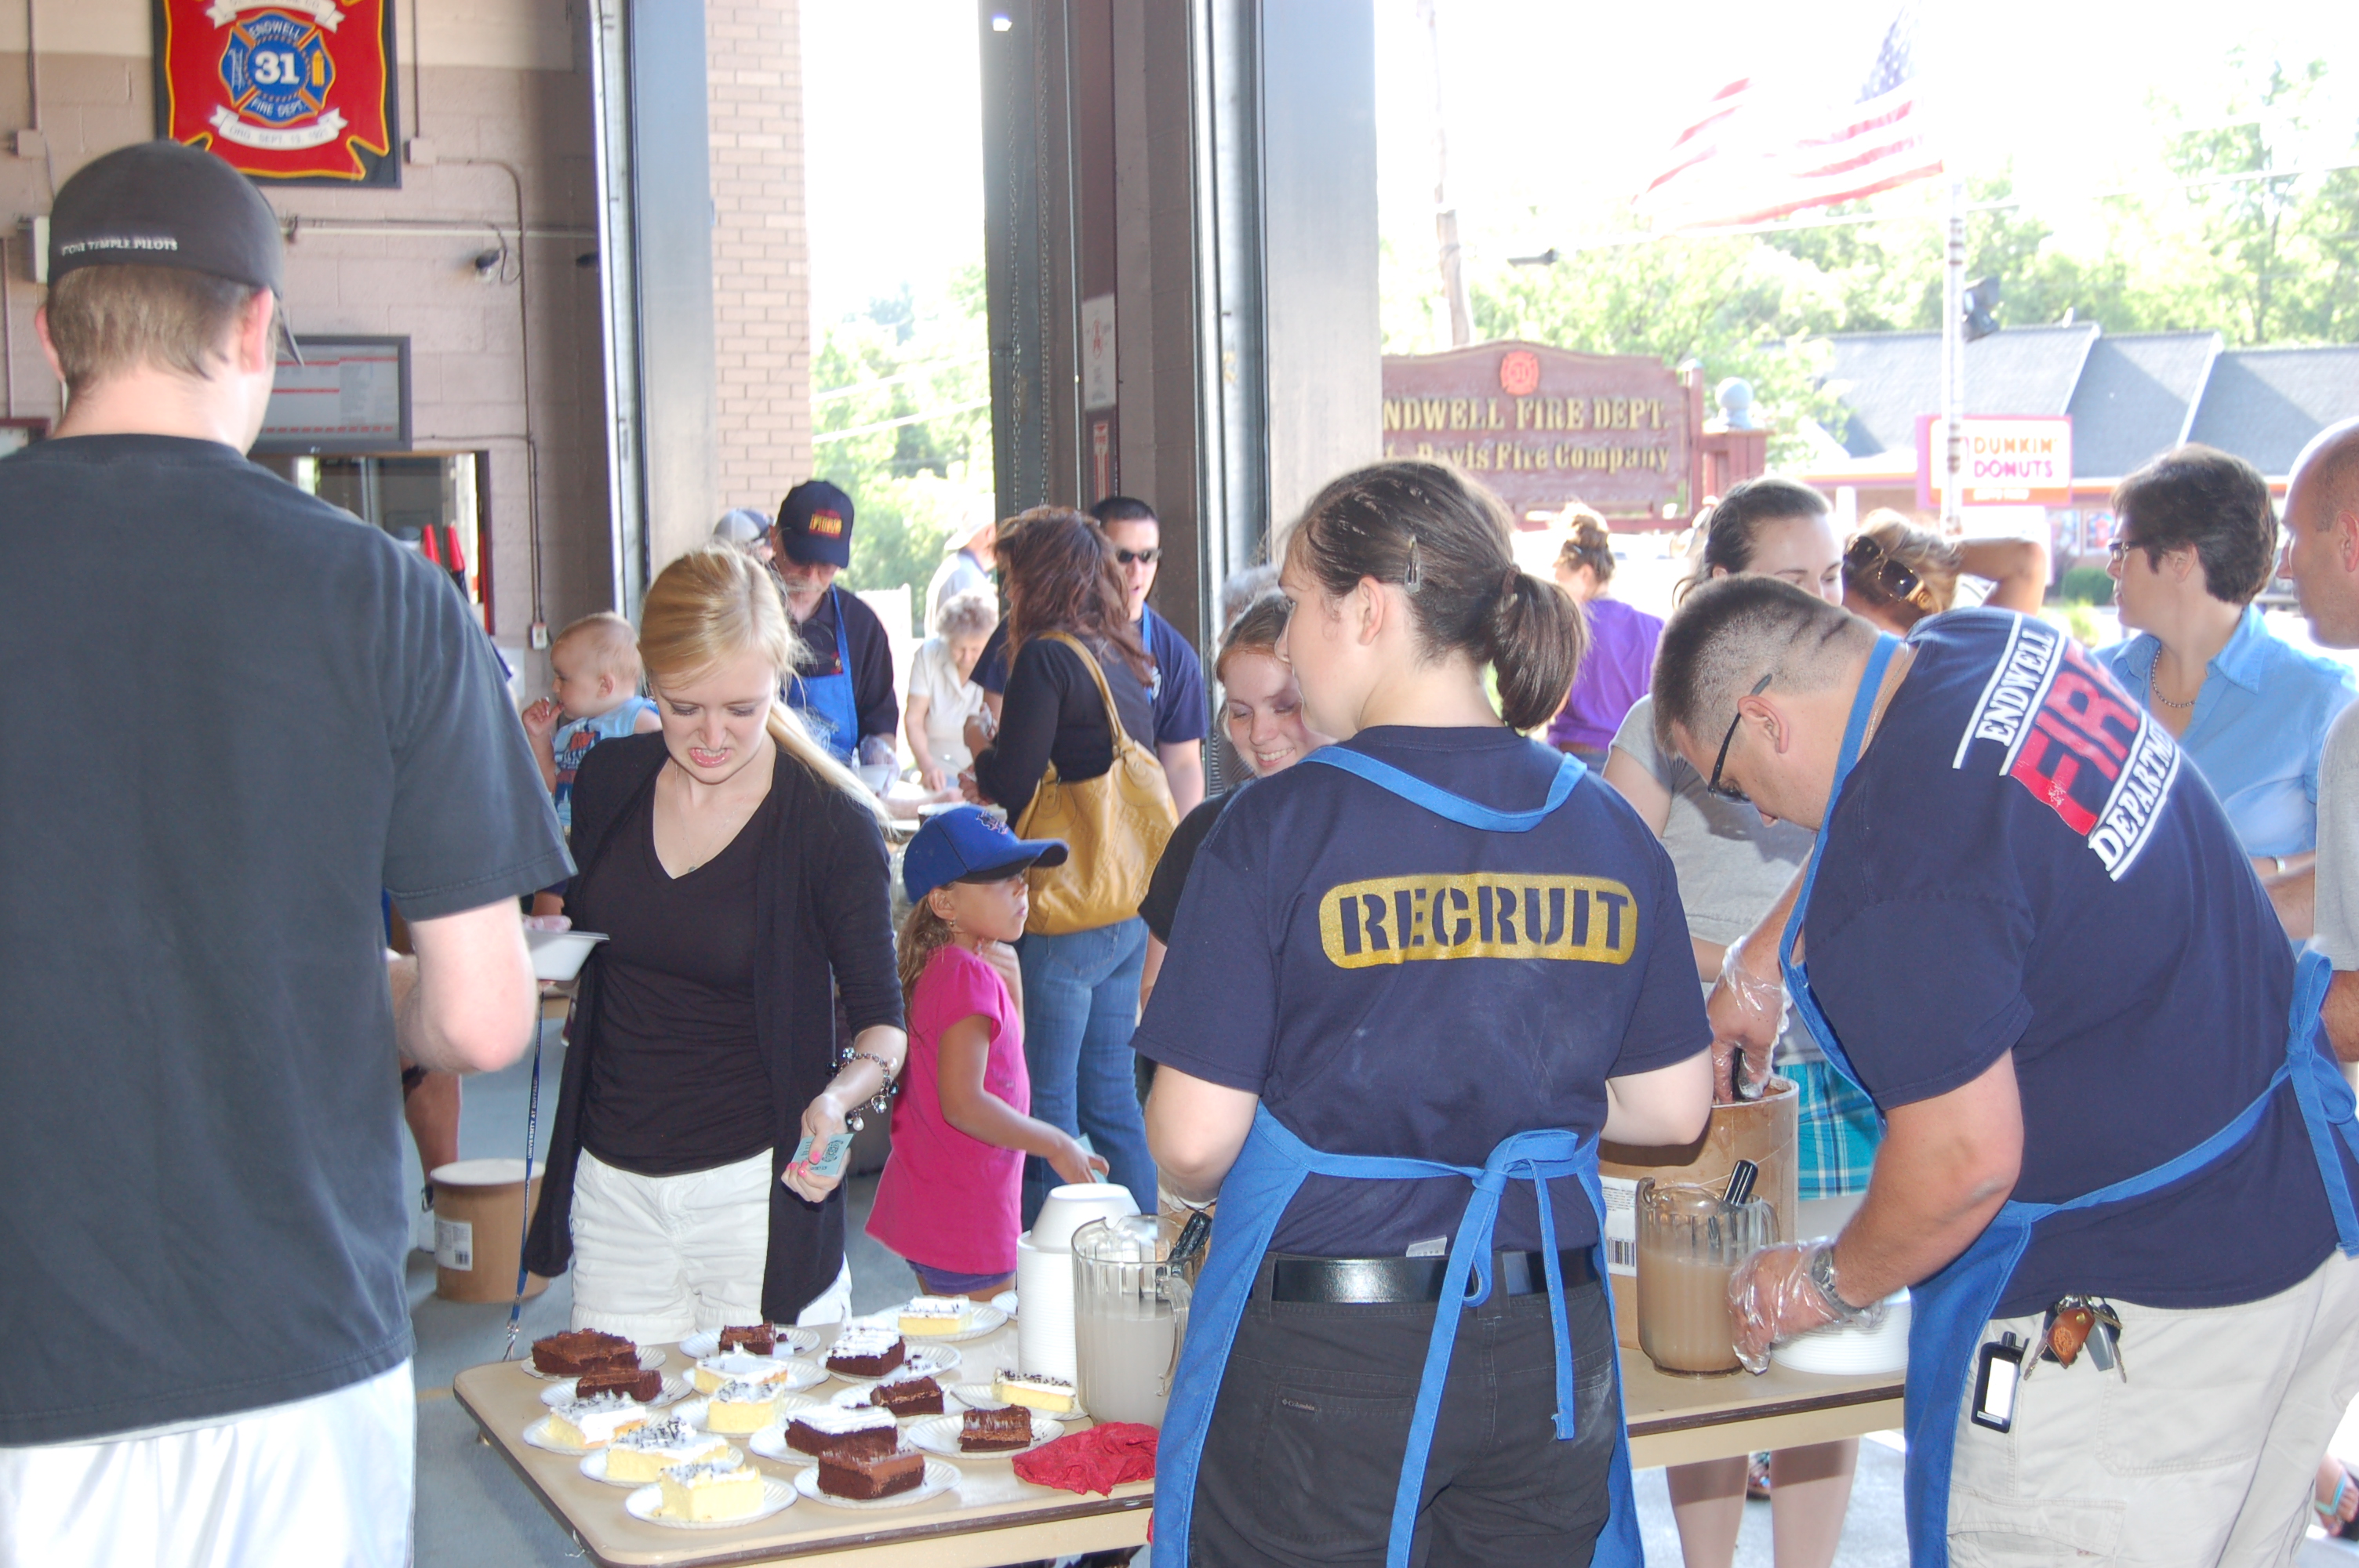 07-13-11  Other - Ice Cream Social